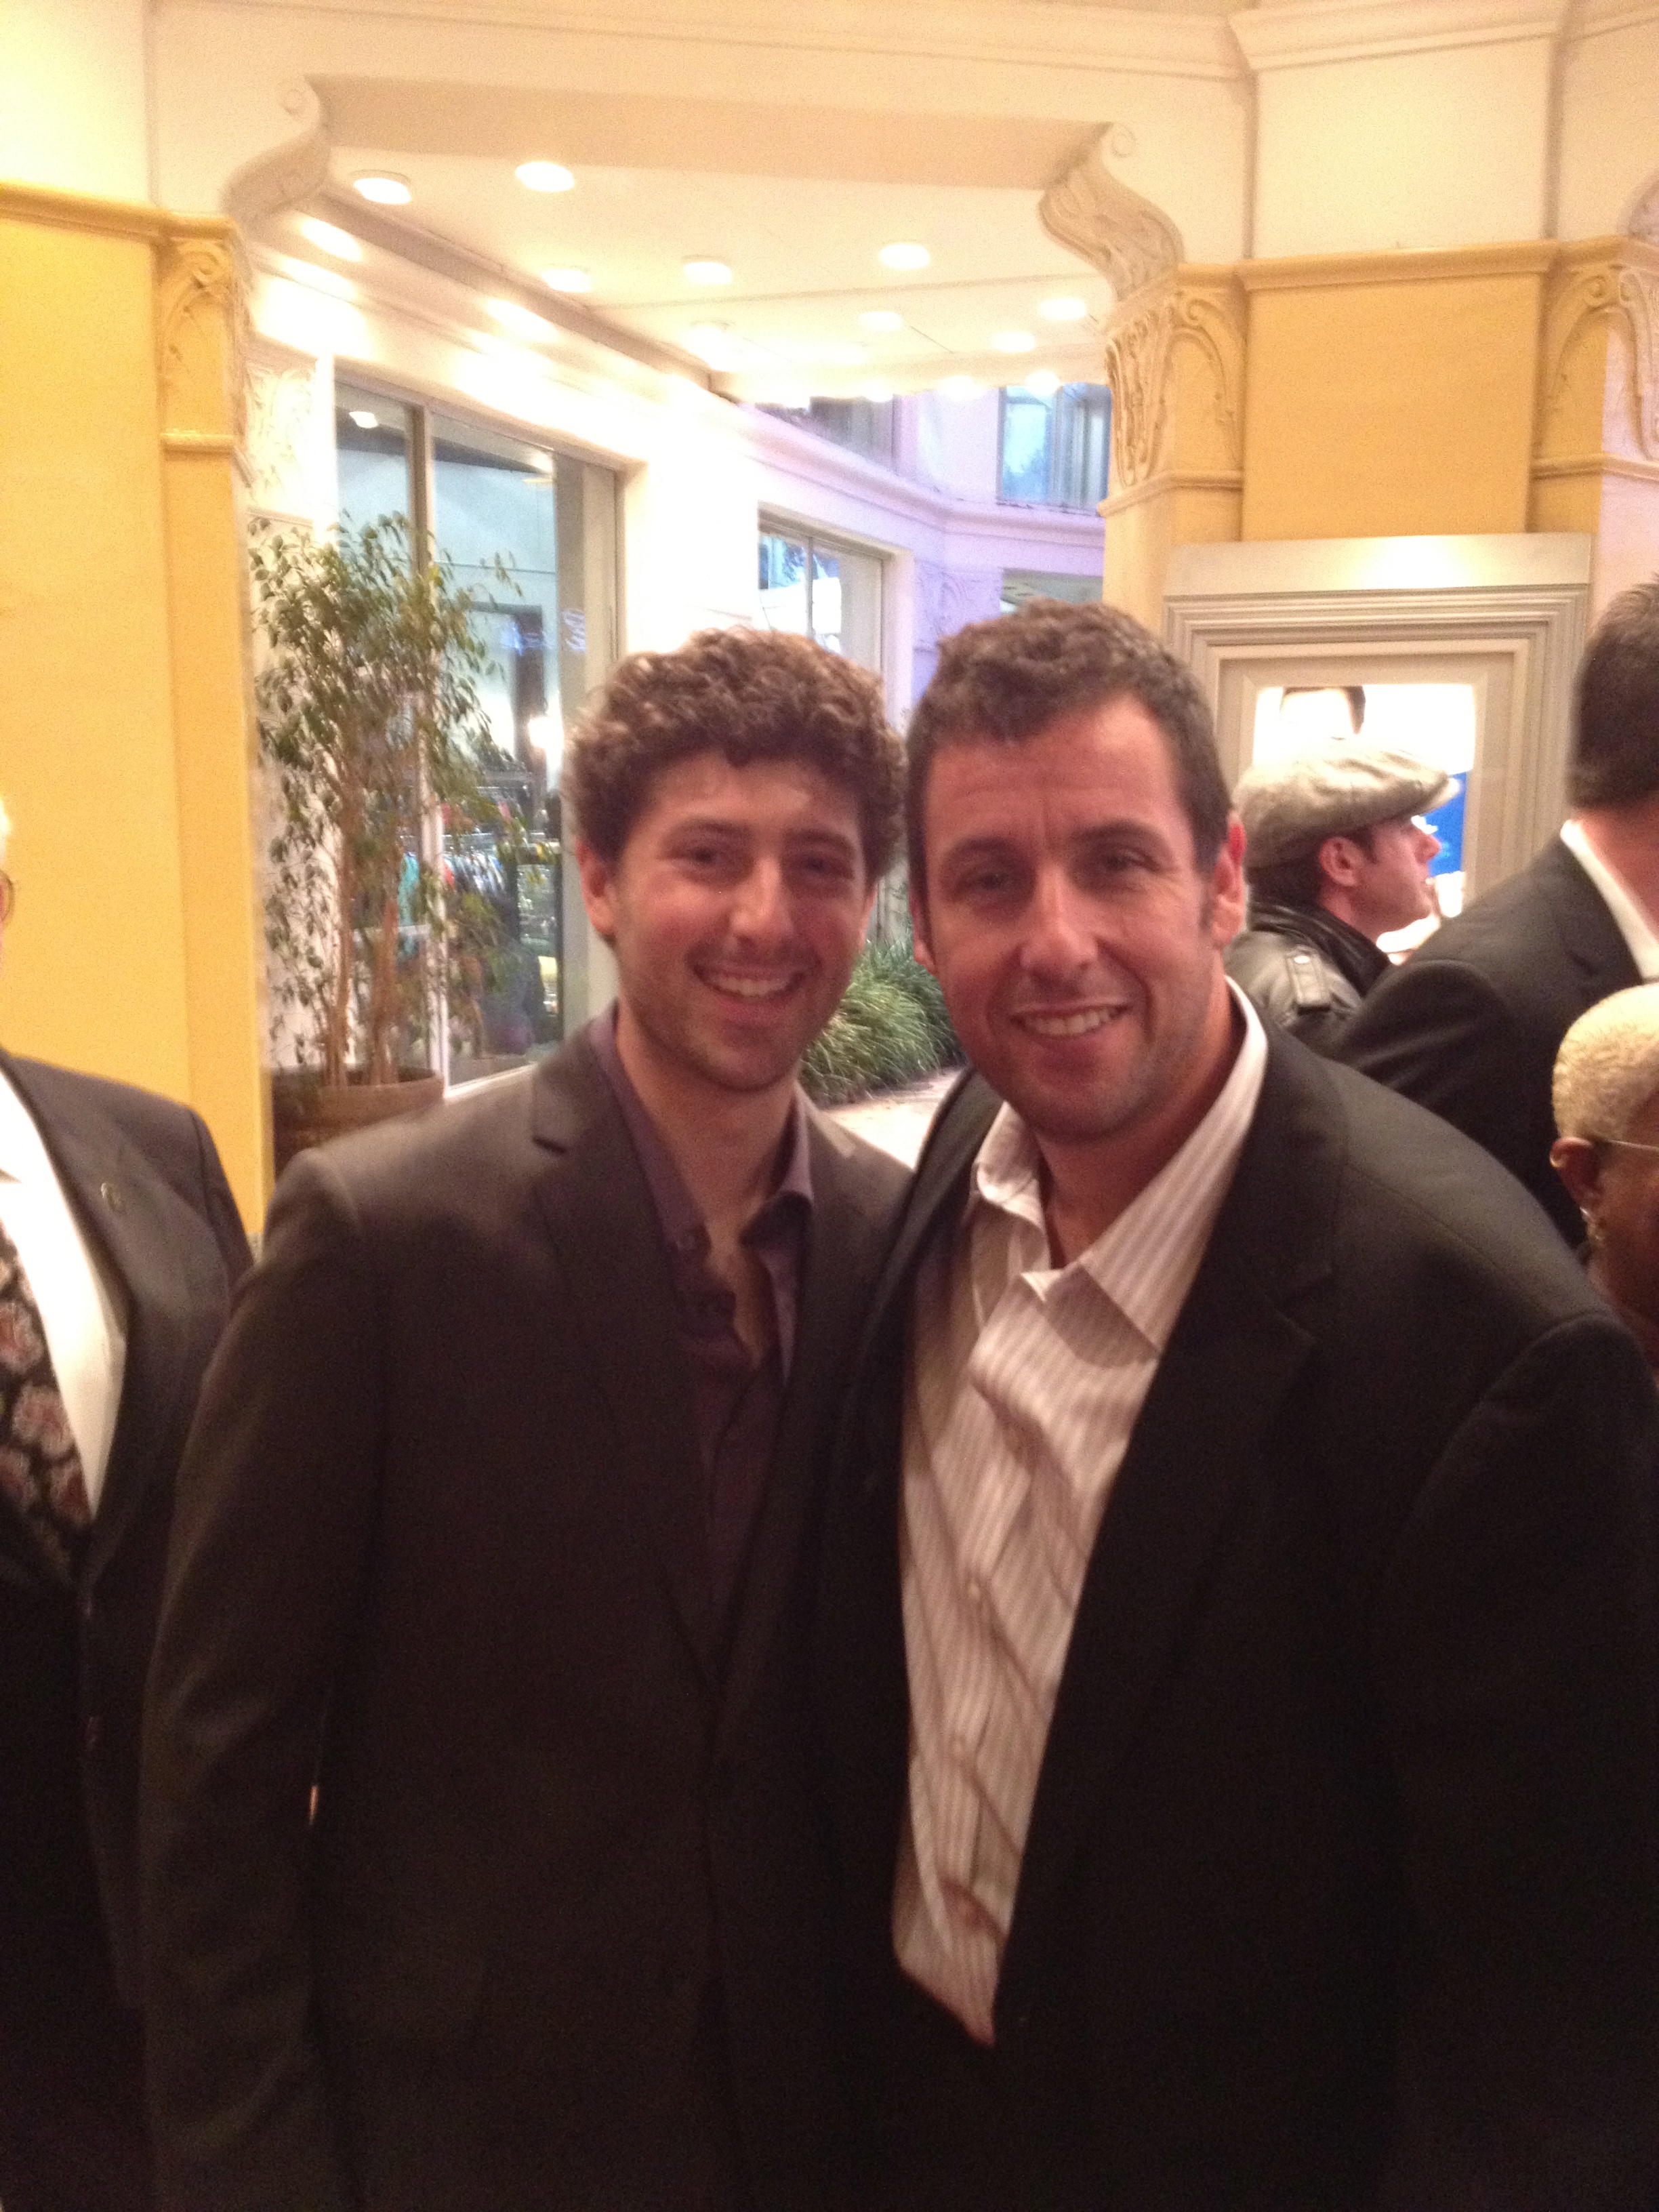 Andy Goldenberg with Adam Sandler at the JACK AND JILL Premiere in Westwood